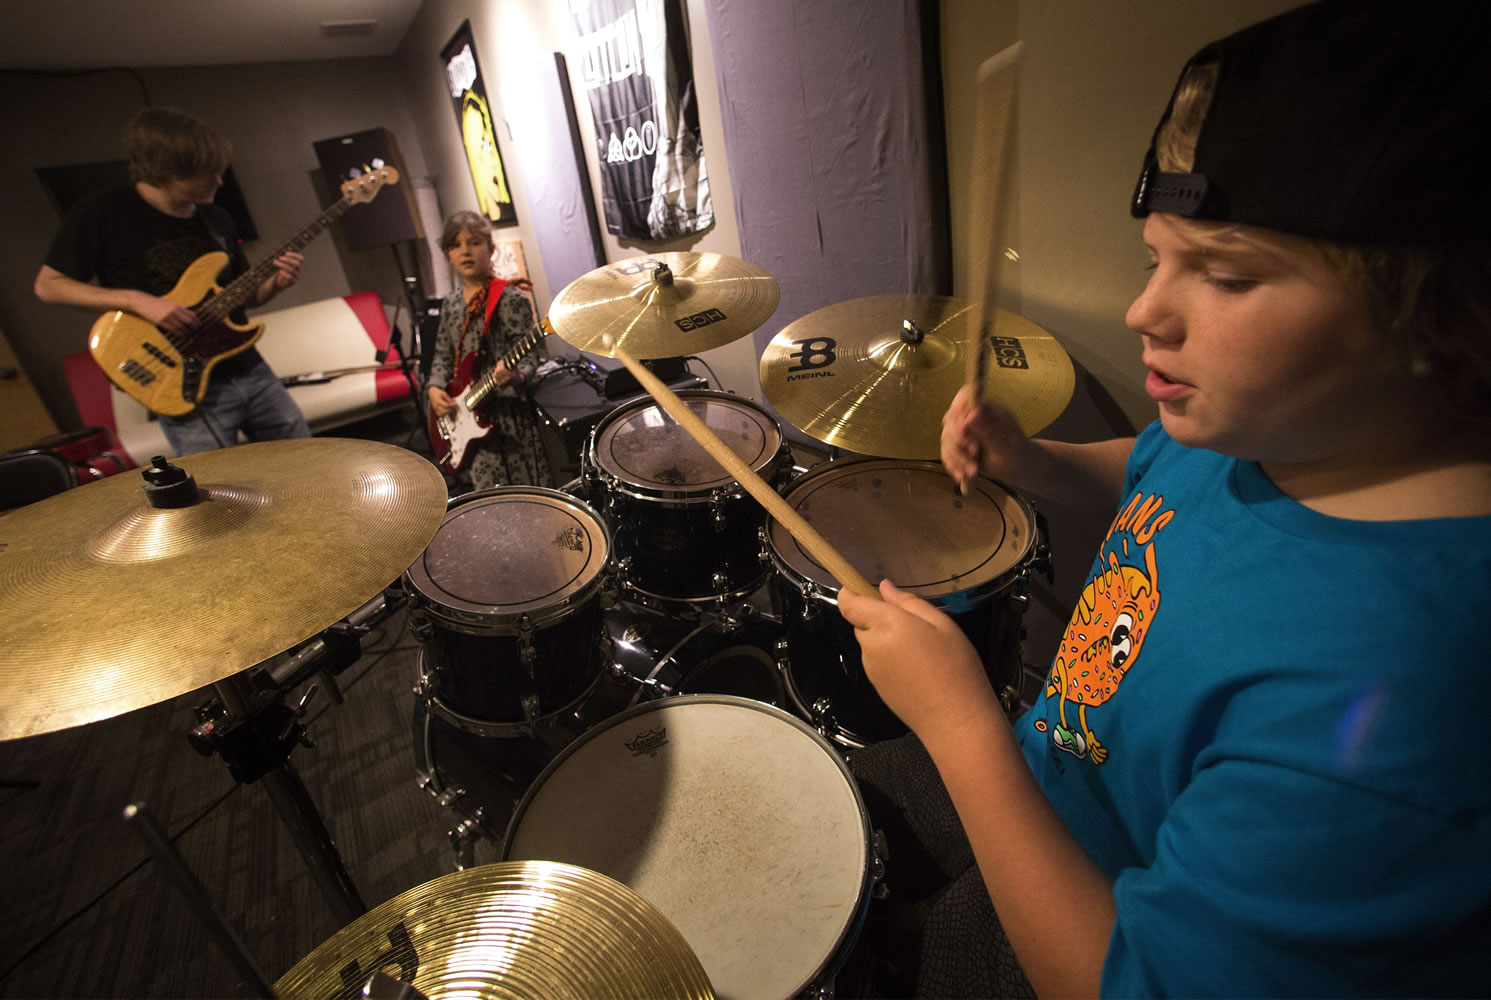 Under the instruction of Philip Gustason, left, general manager at the School of Rock in Seattle, Ro'ya Mottaghinejad, 8, back right, and Wade Beeler, right, jam together in a day camp at the school while Seattle teachers are on strike on Monday, Sept. 14, 2015. (Ellen M.